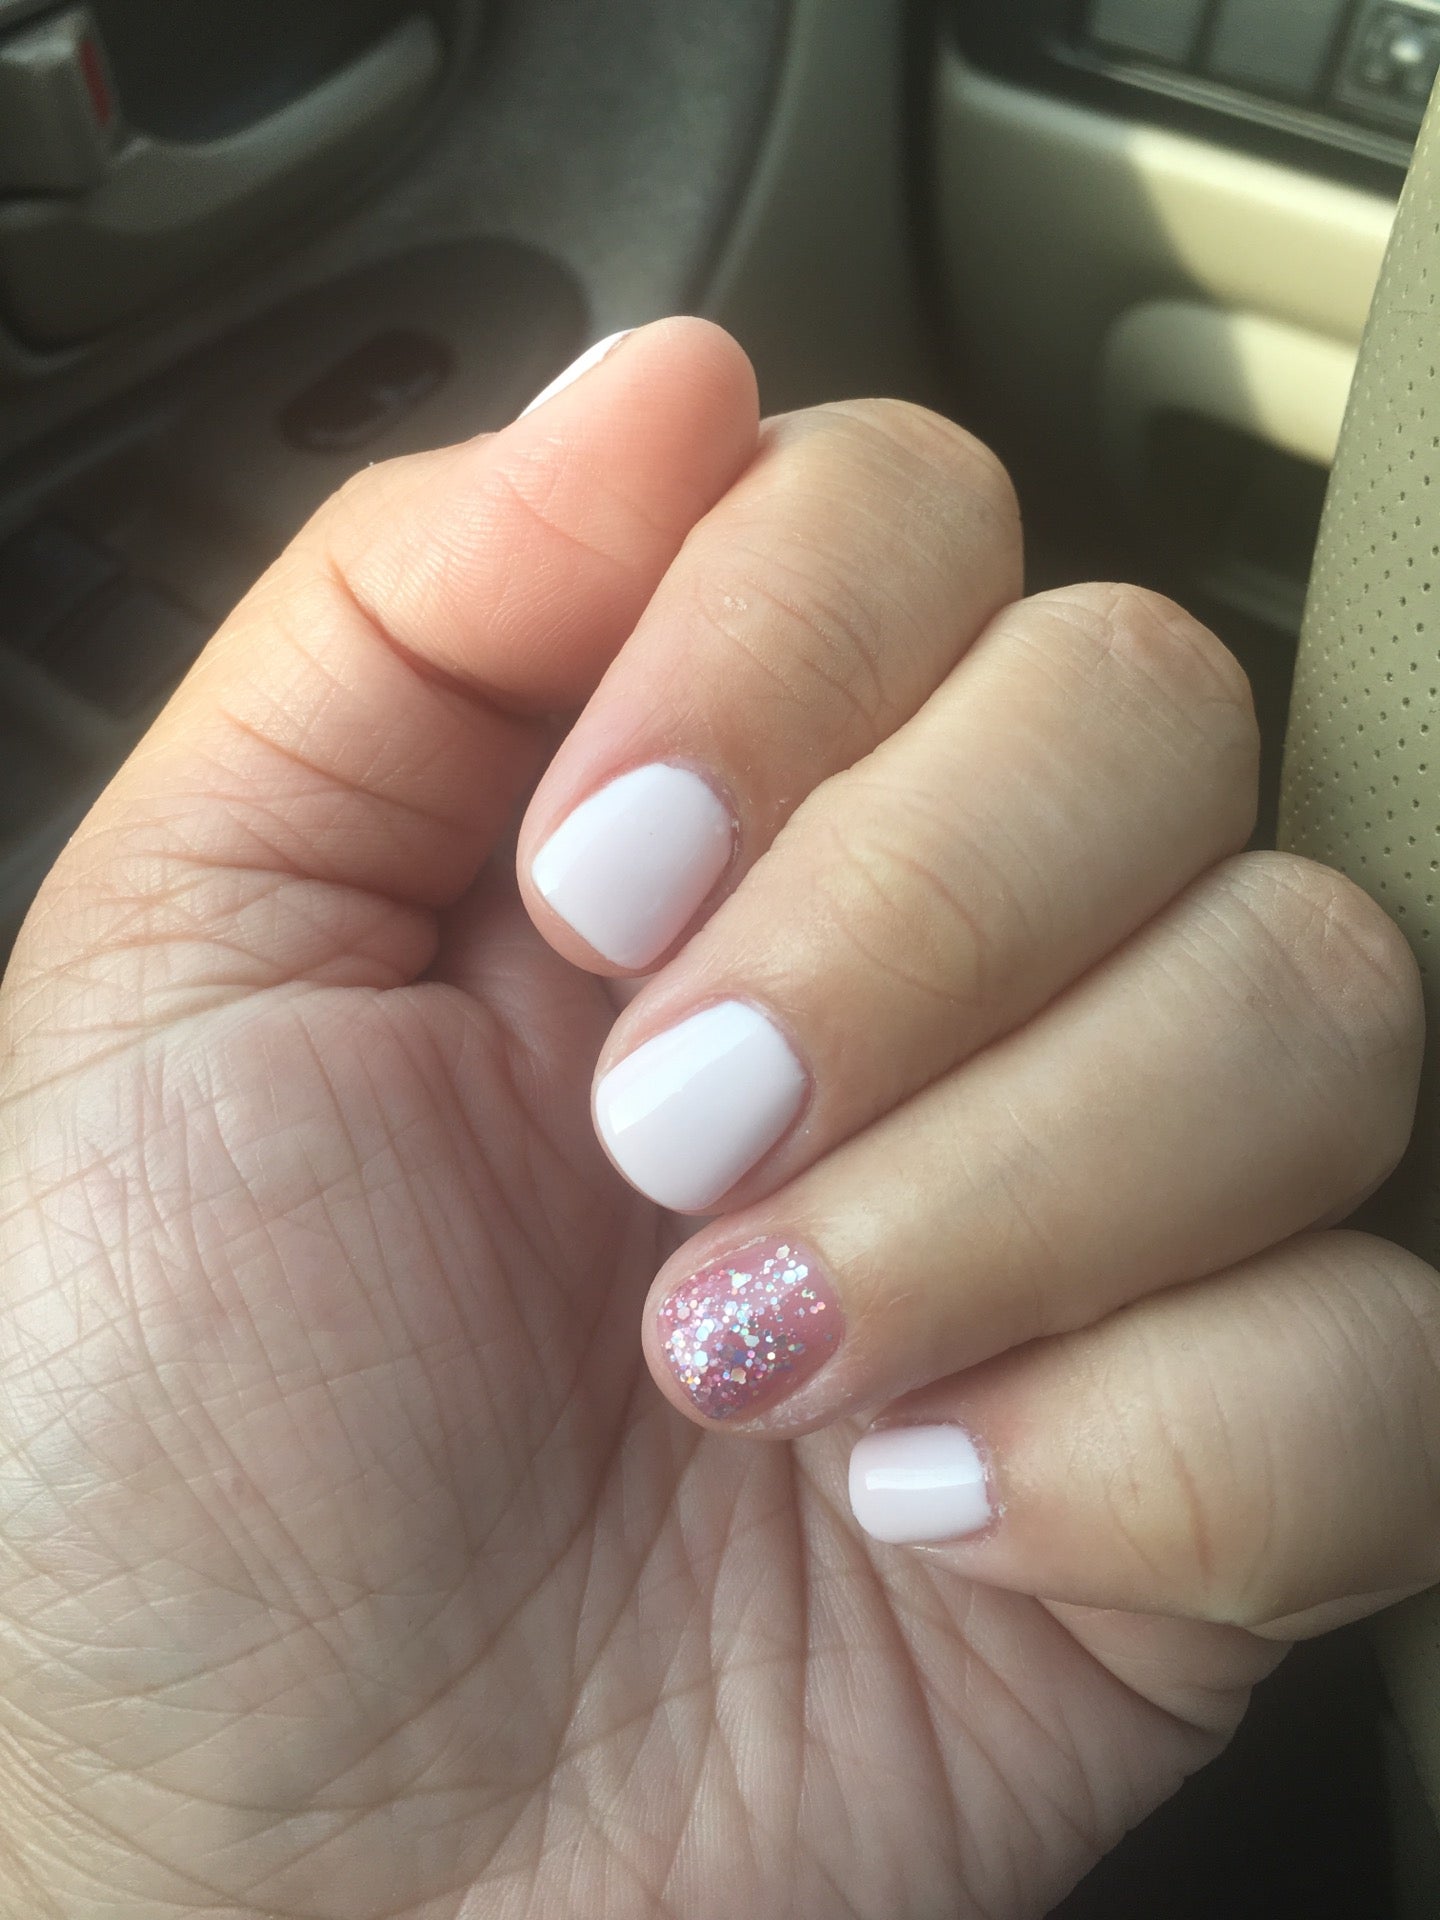 Pink Nails & Spa 1406 Clements Bridge Rd #1, Deptford New Jersey 08096